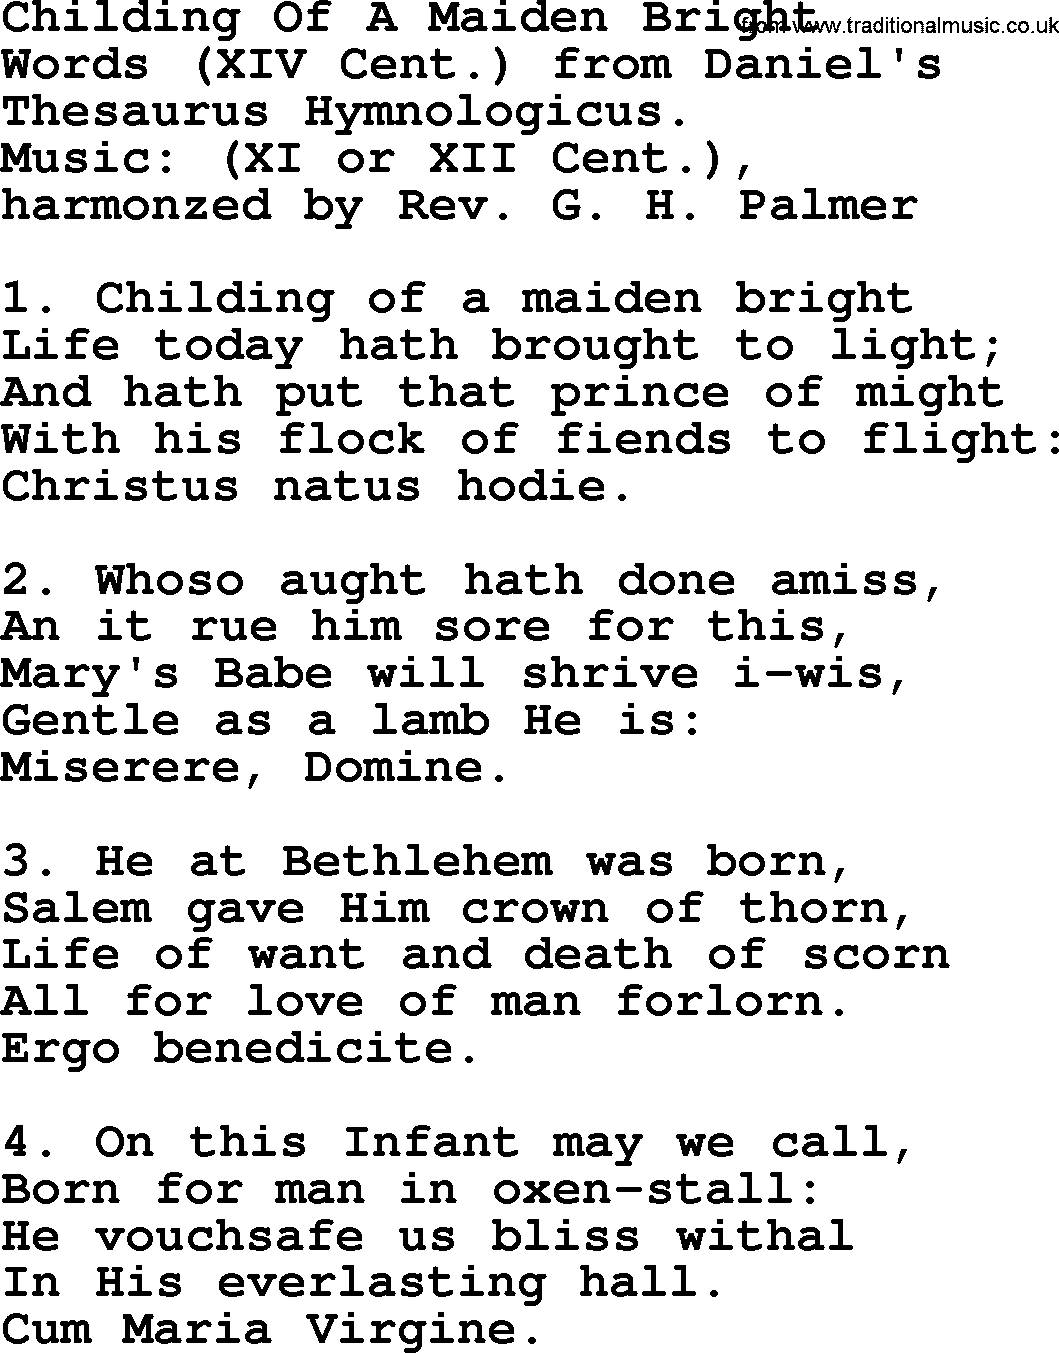 280 Christmas Hymns and songs with PowerPoints and PDF, title: Childing Of A Maiden Bright, lyrics, PPT and PDF